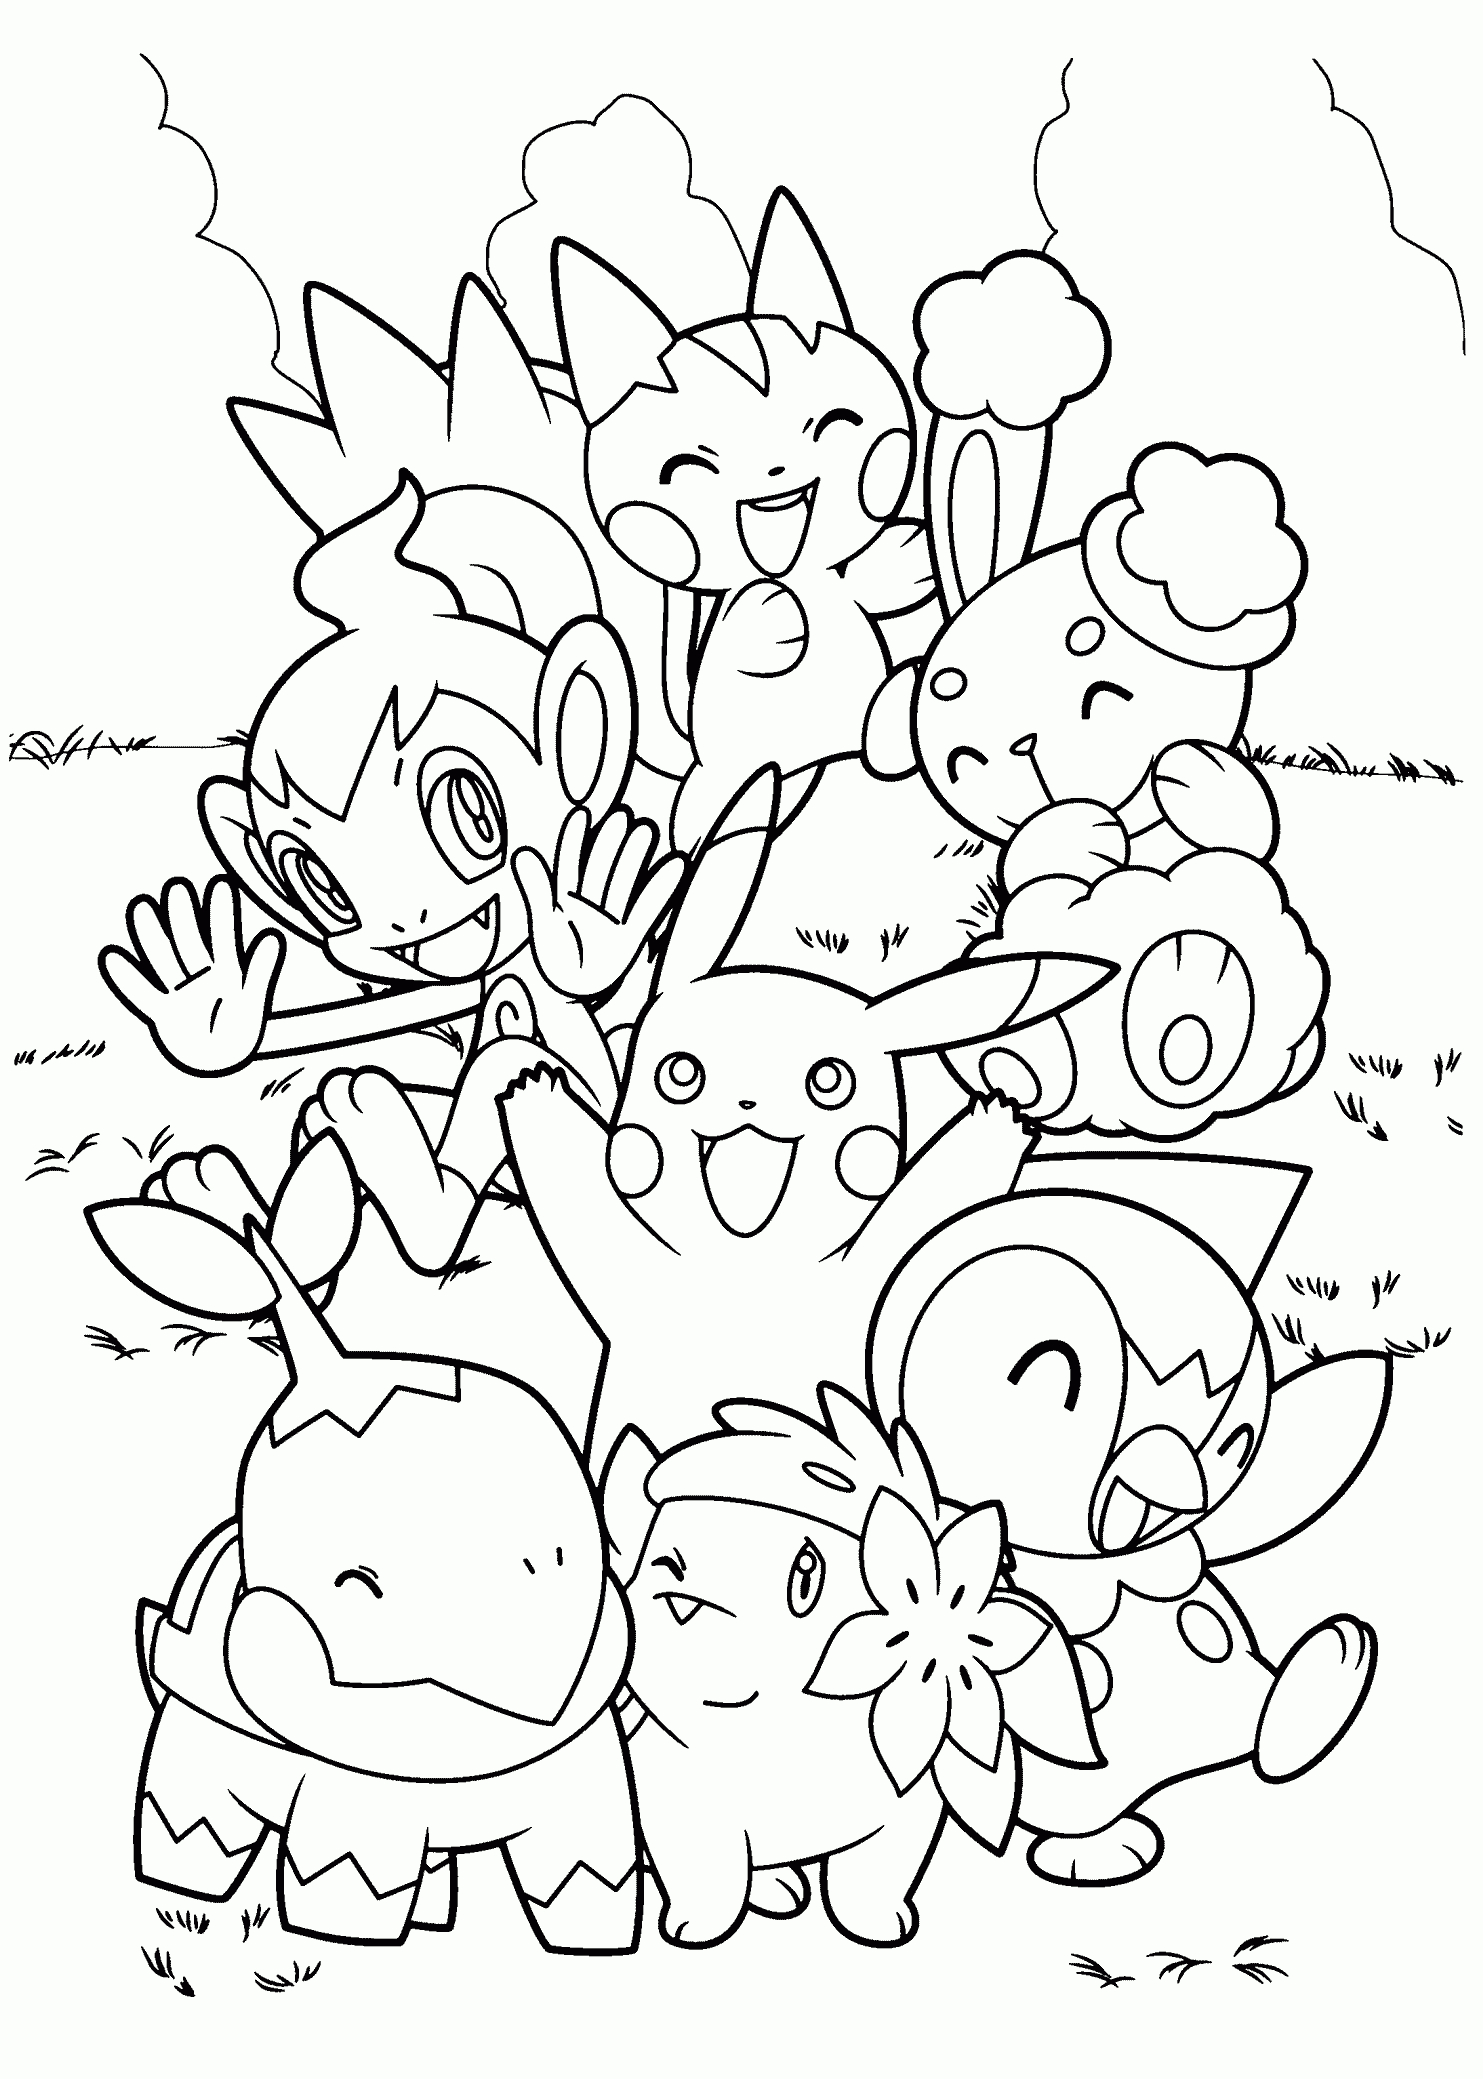 Top 90 Free Printable Pokemon Coloring Pages Online | Pokemon Party - Free Printable Pokemon Coloring Pages